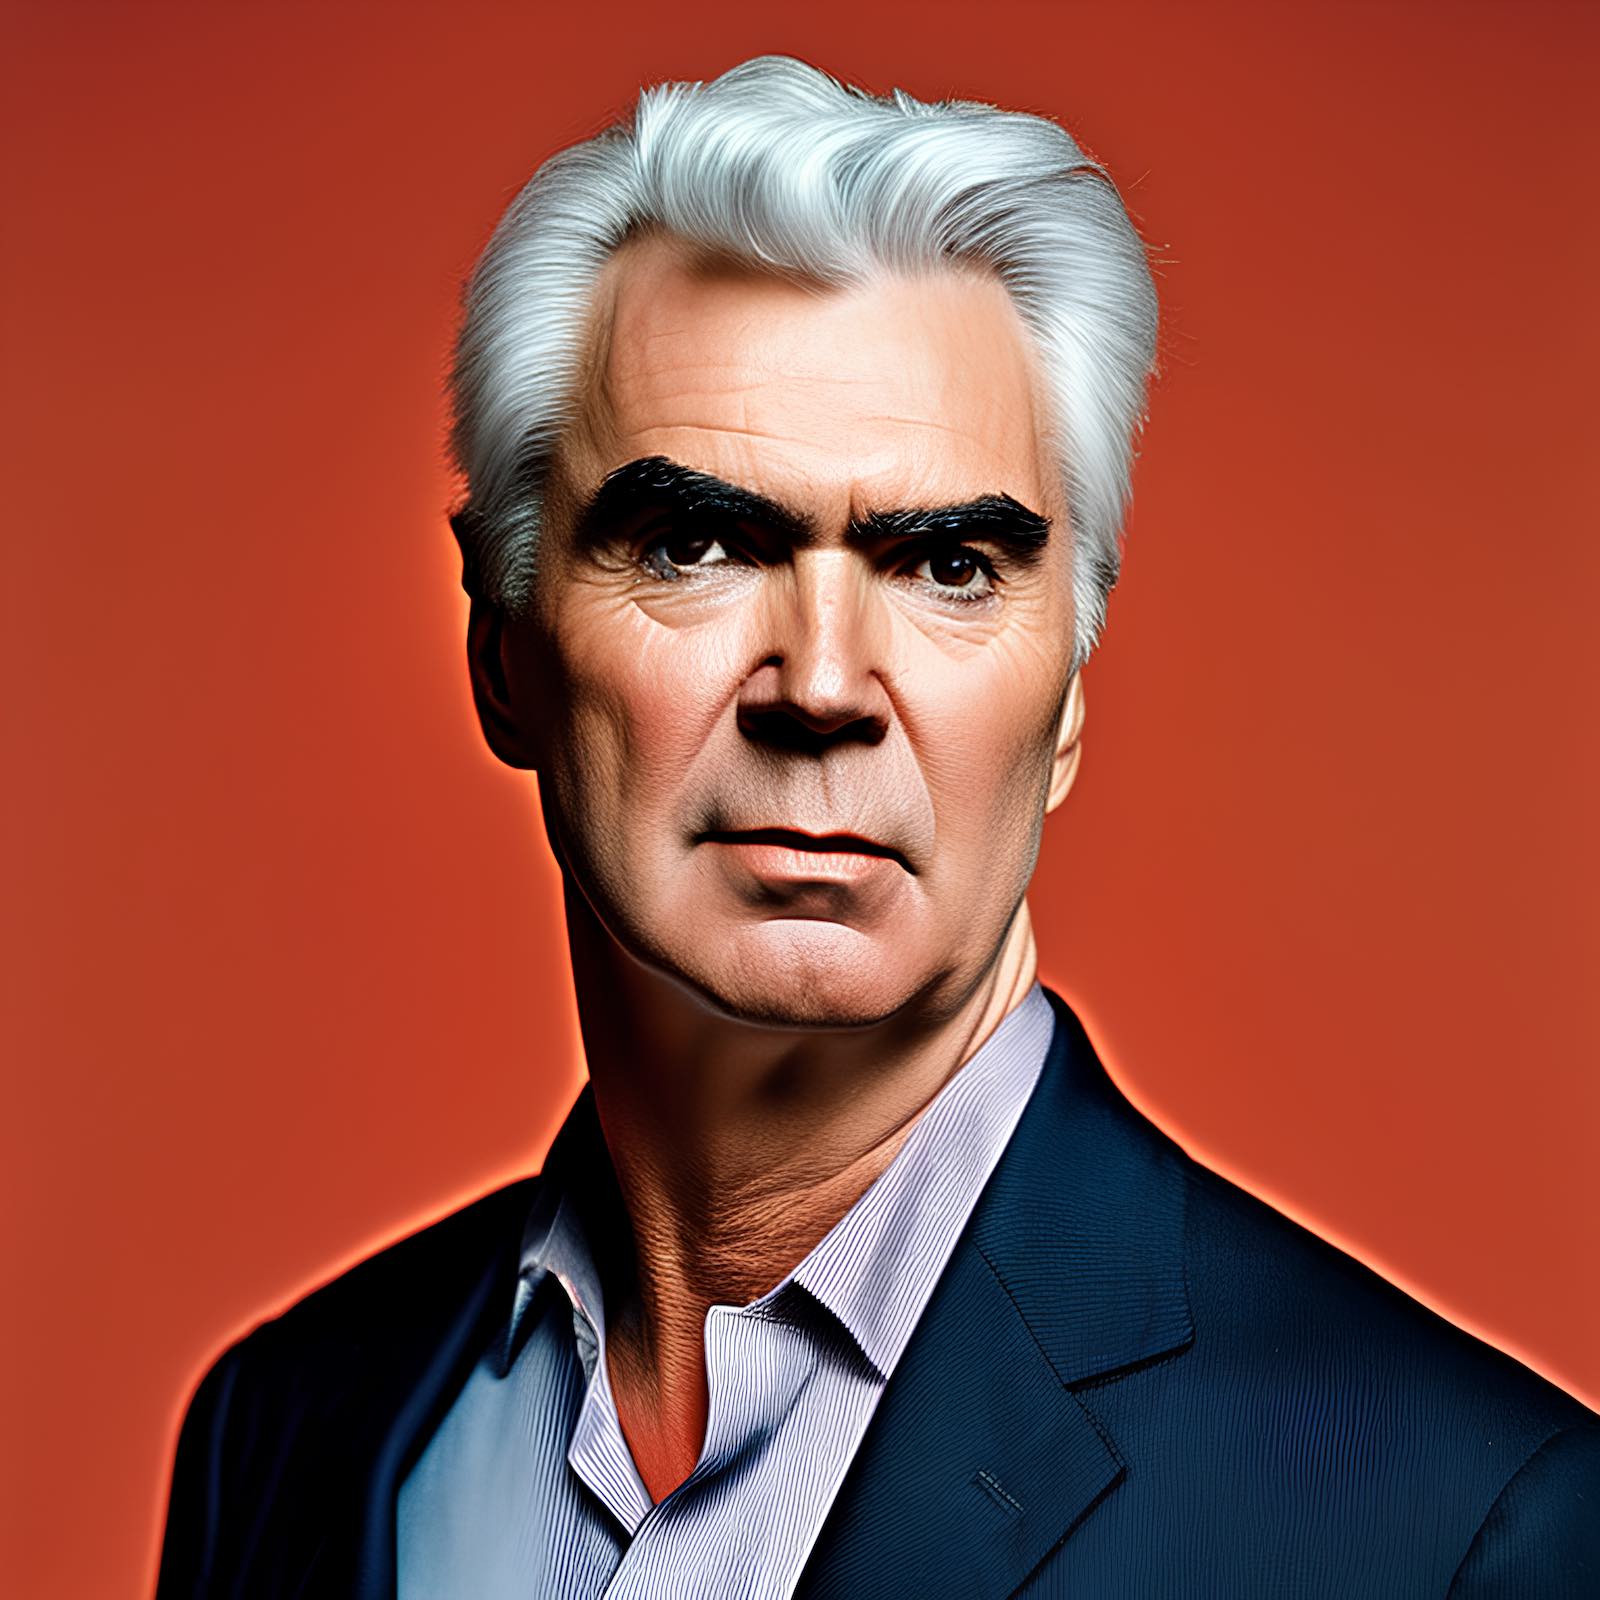 Good music industry article by David Byrne